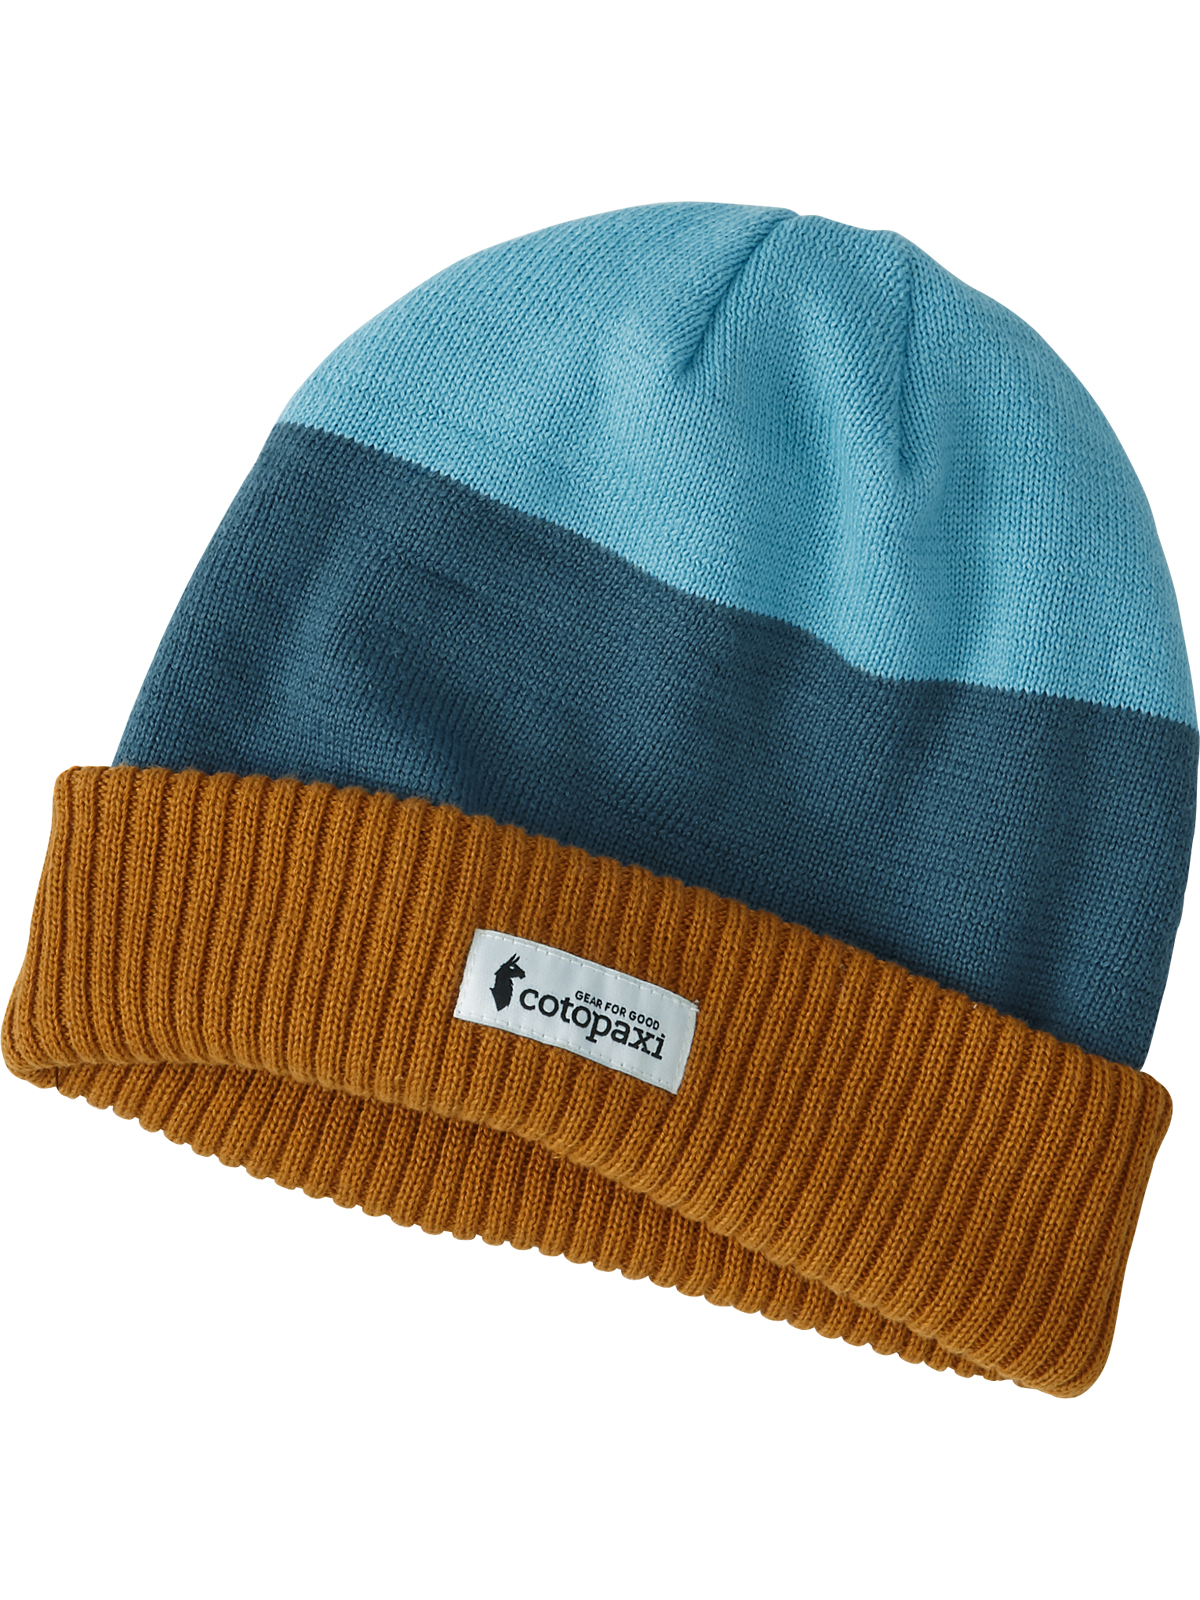 Cotopaxi Beanie Hat: Out of Network | Title Nine